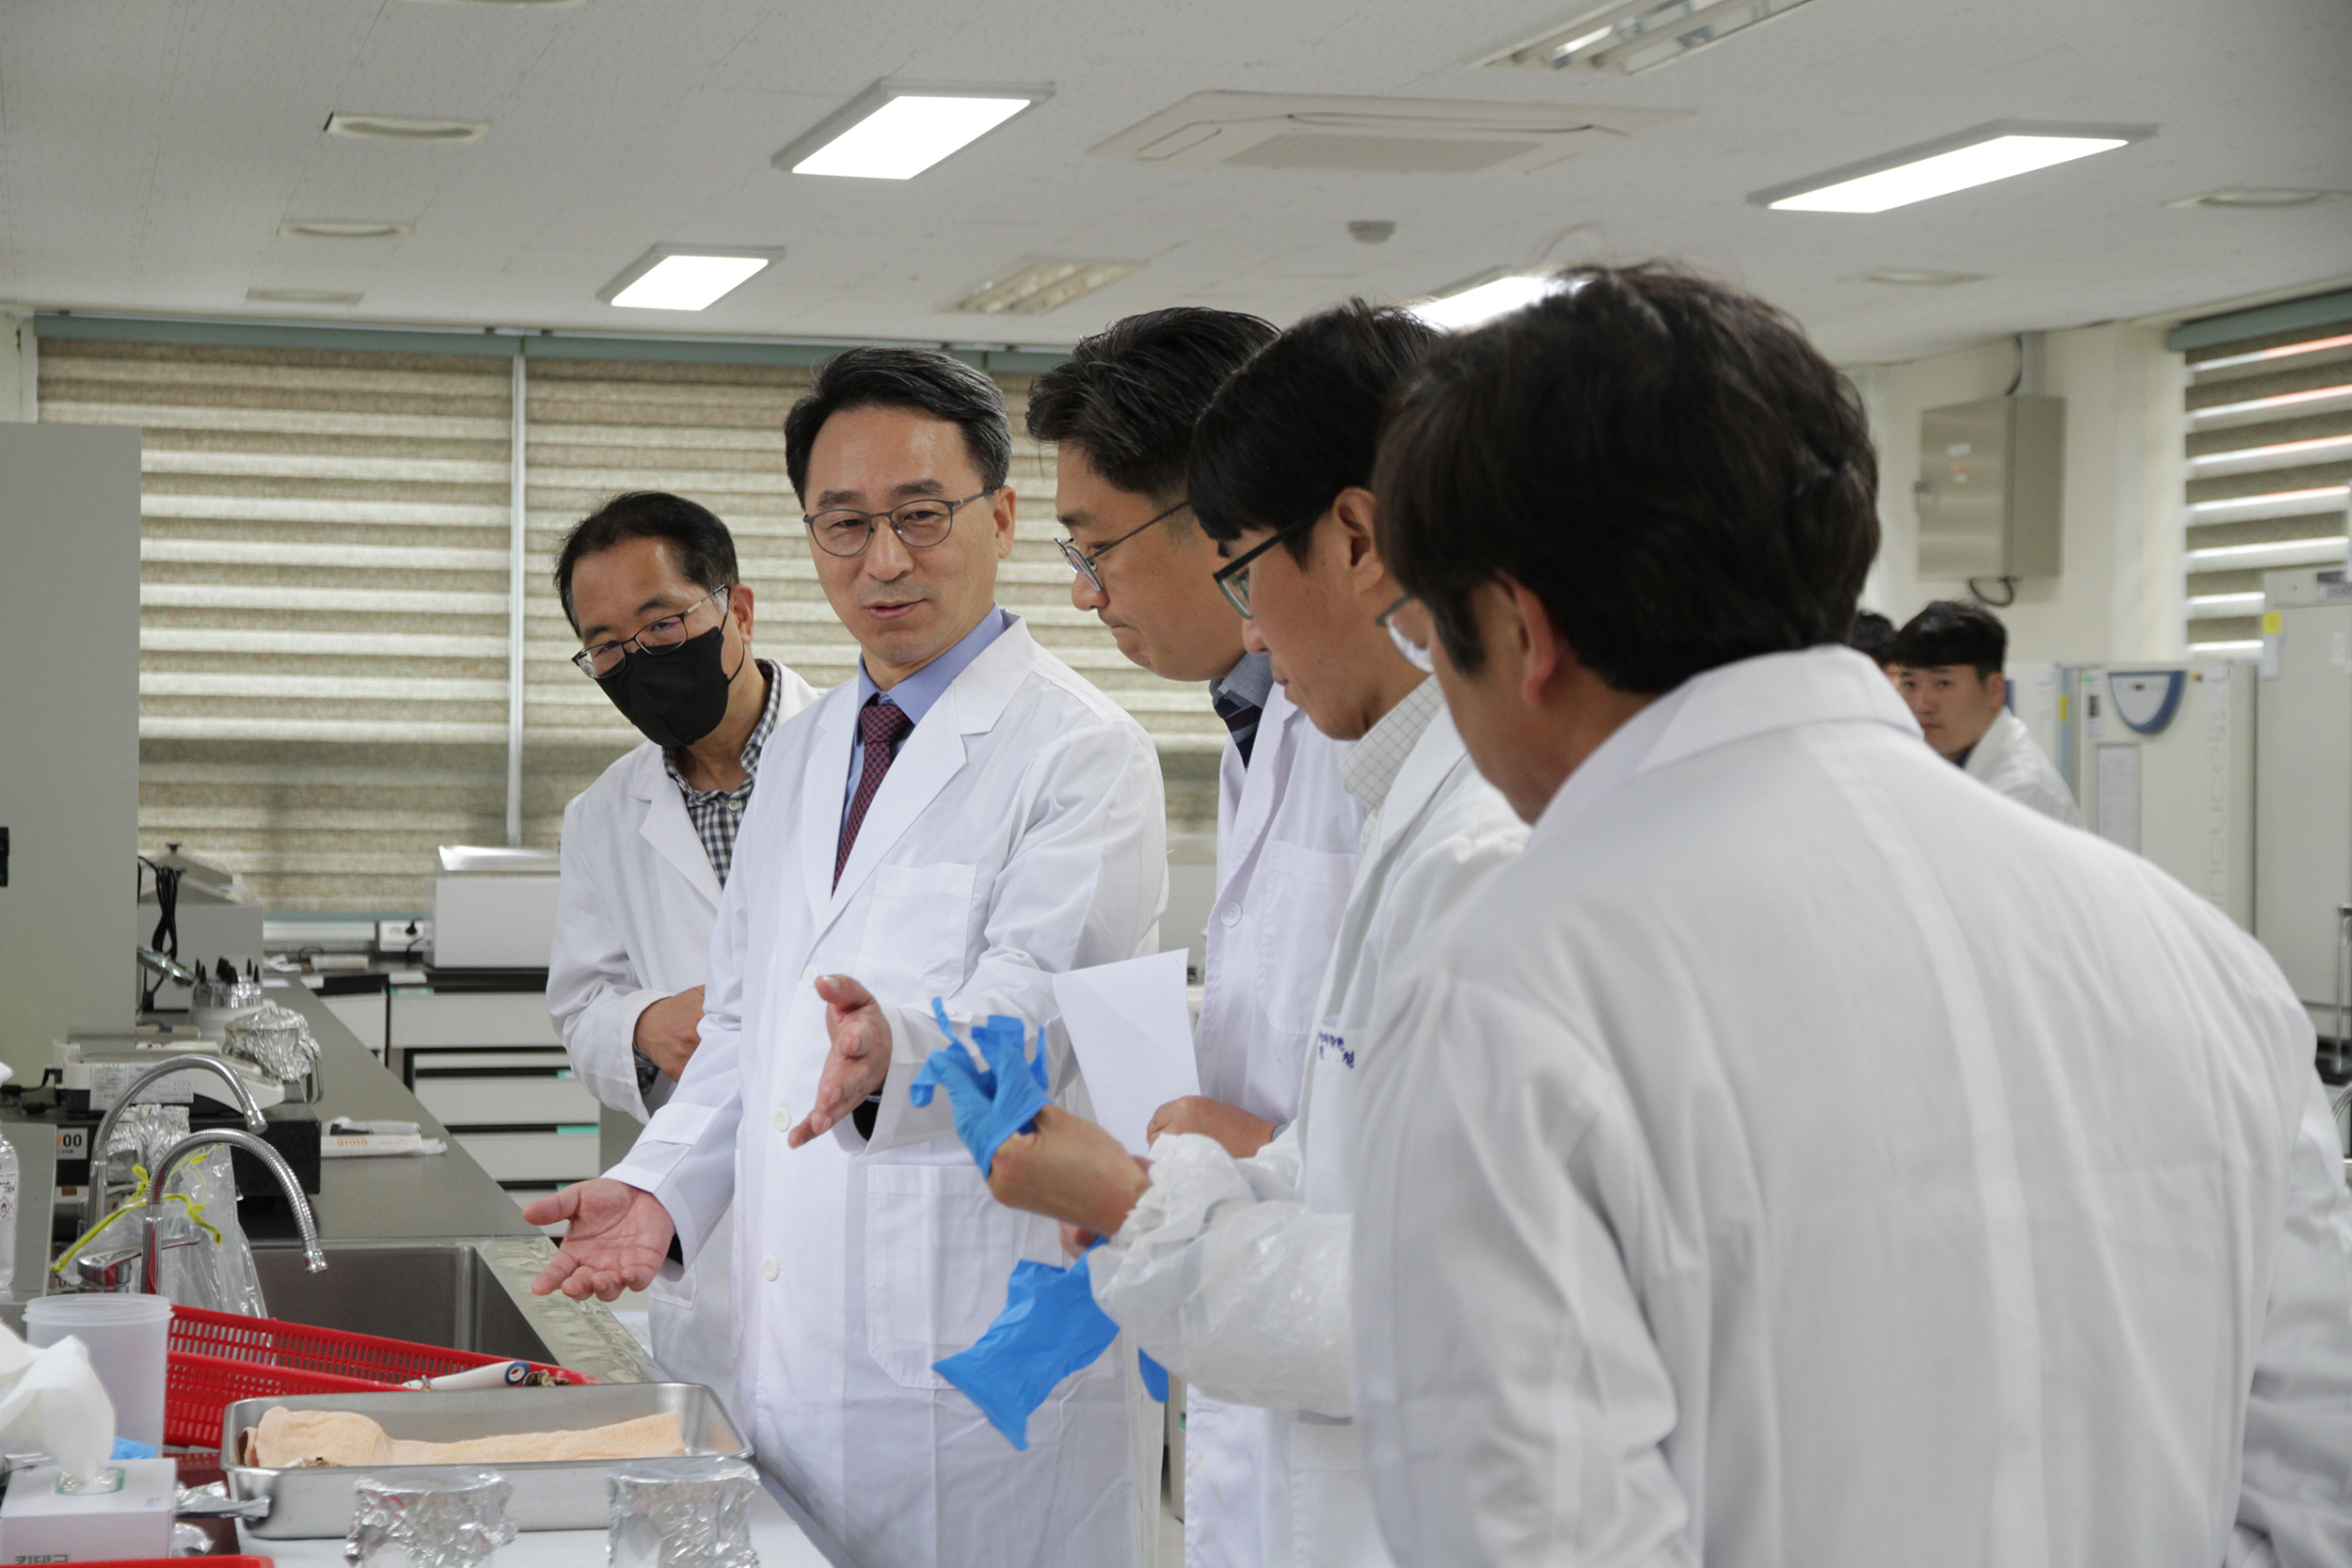 NIFS conducted site inspections in the preparation for FDA&apos;s sanitary survey 배경